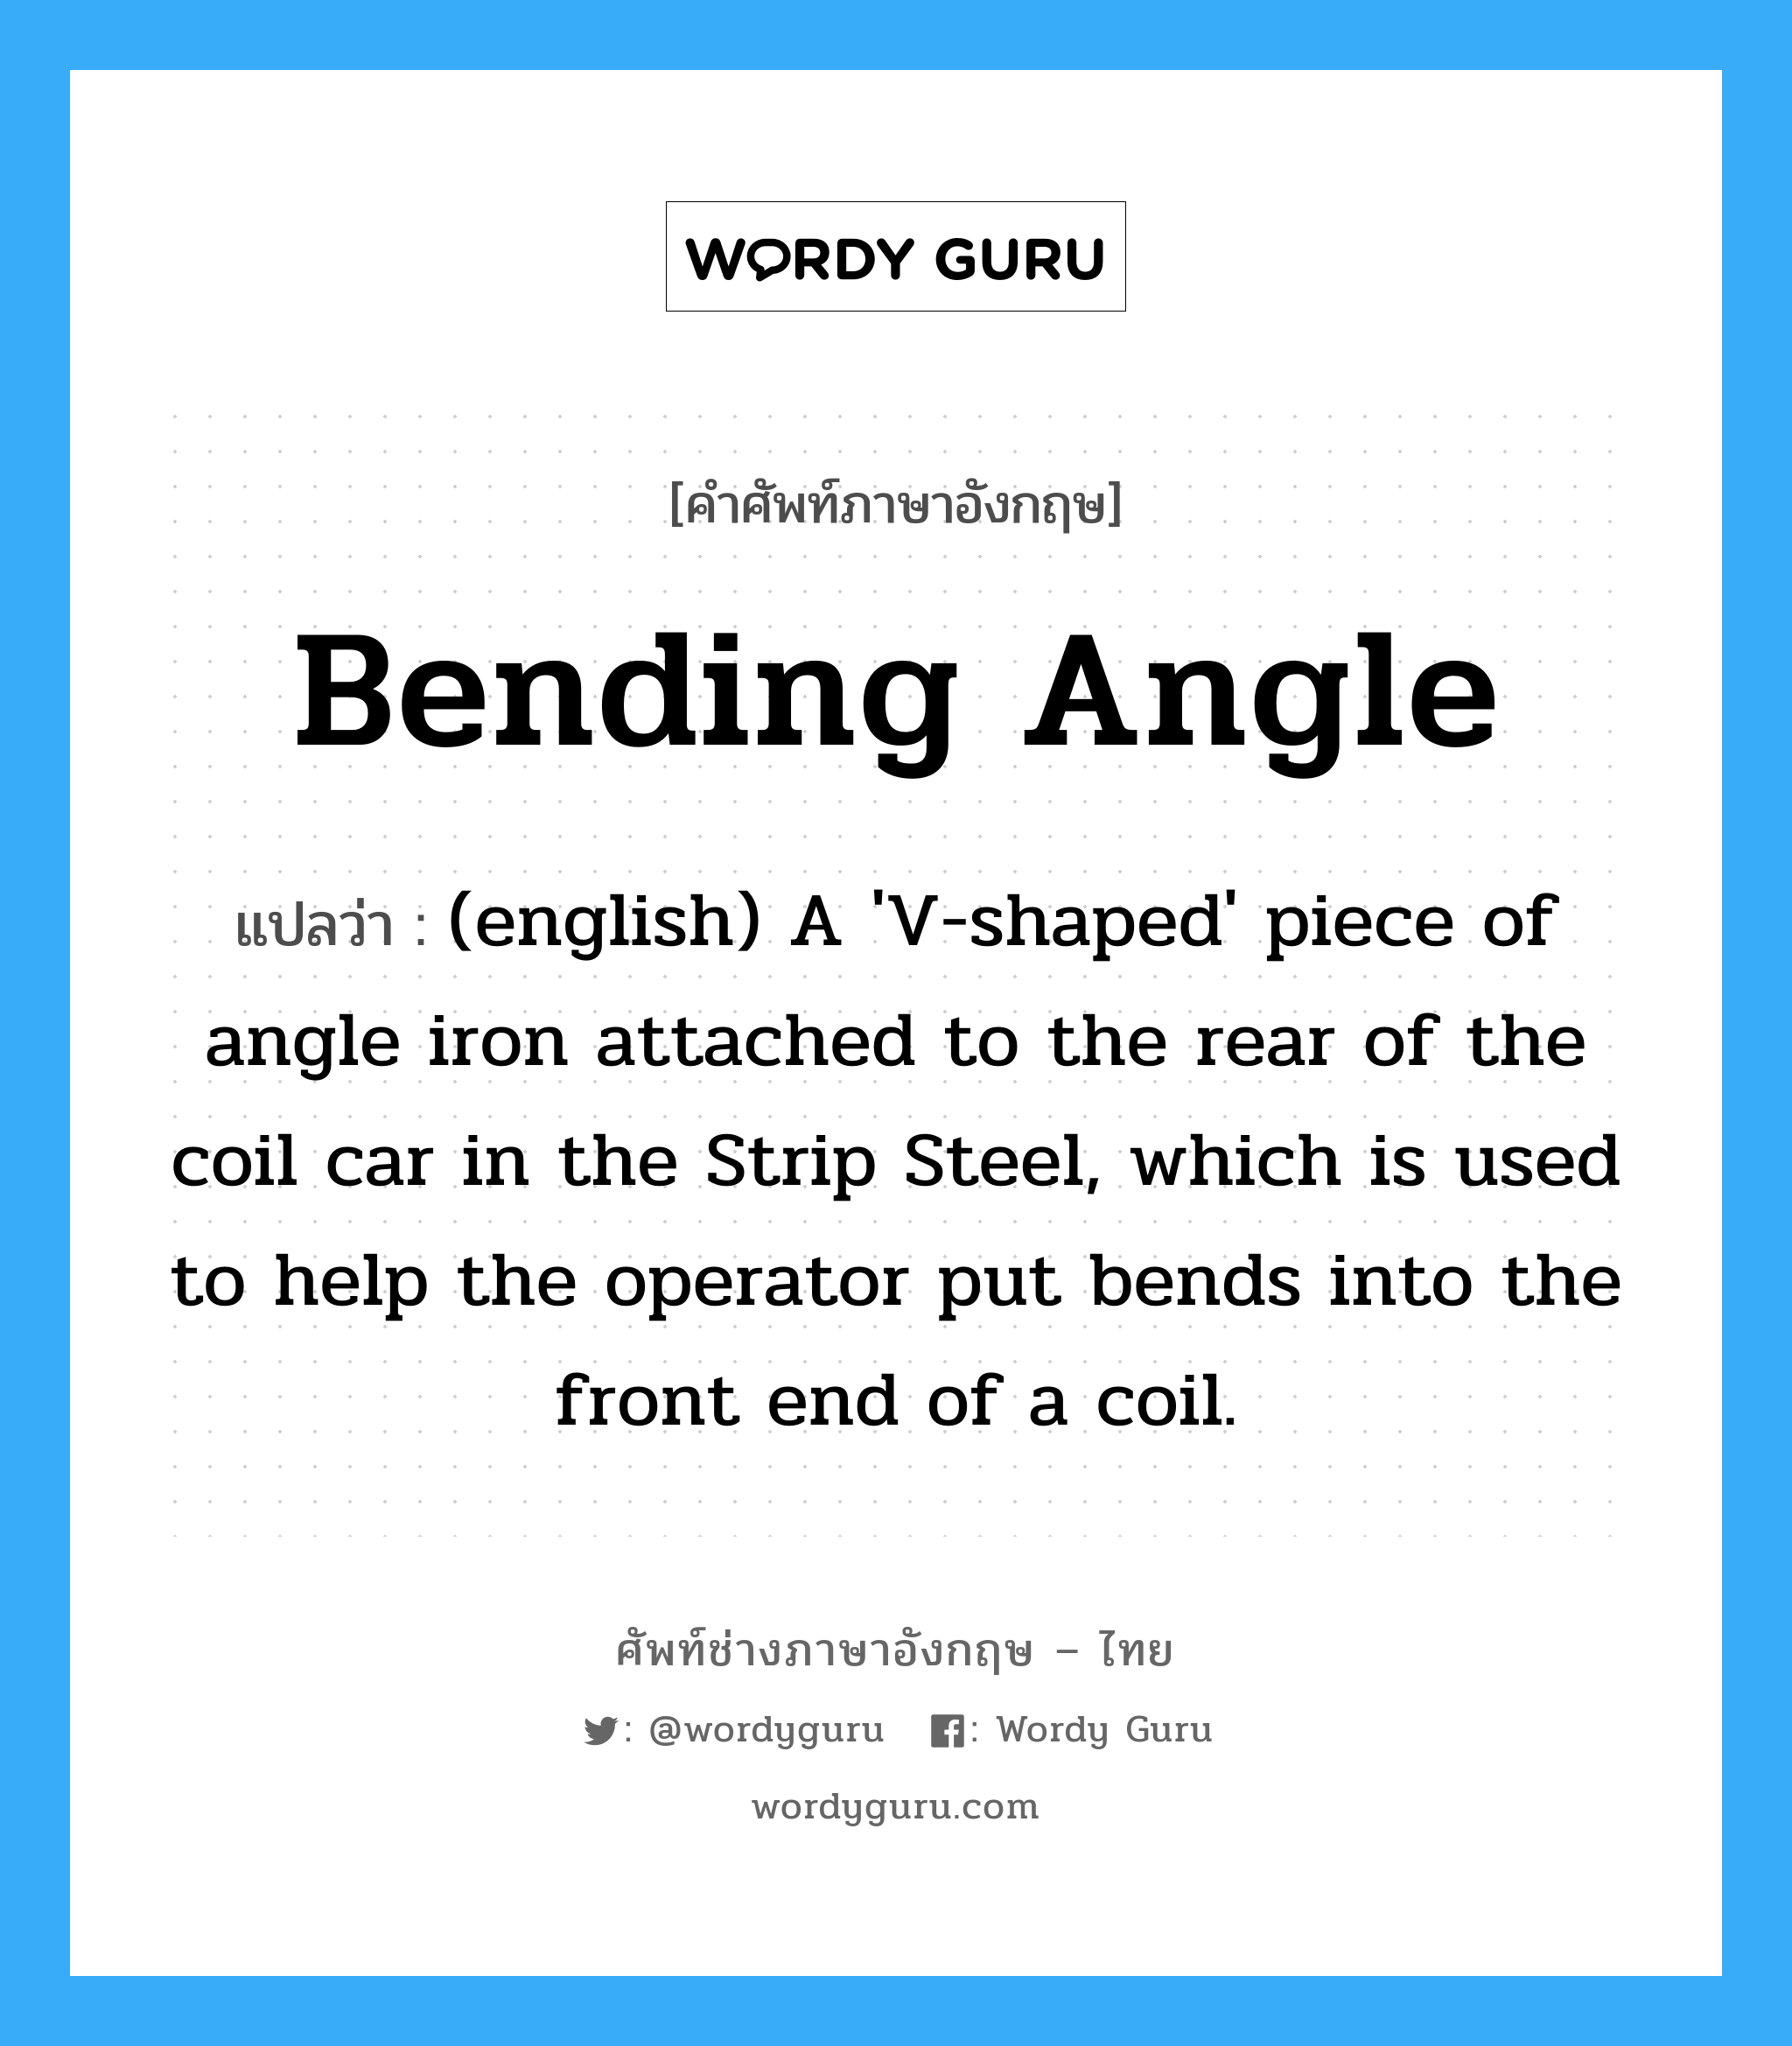 Bending Angle แปลว่า?, คำศัพท์ช่างภาษาอังกฤษ - ไทย Bending Angle คำศัพท์ภาษาอังกฤษ Bending Angle แปลว่า (english) A 'V-shaped' piece of angle iron attached to the rear of the coil car in the Strip Steel, which is used to help the operator put bends into the front end of a coil.